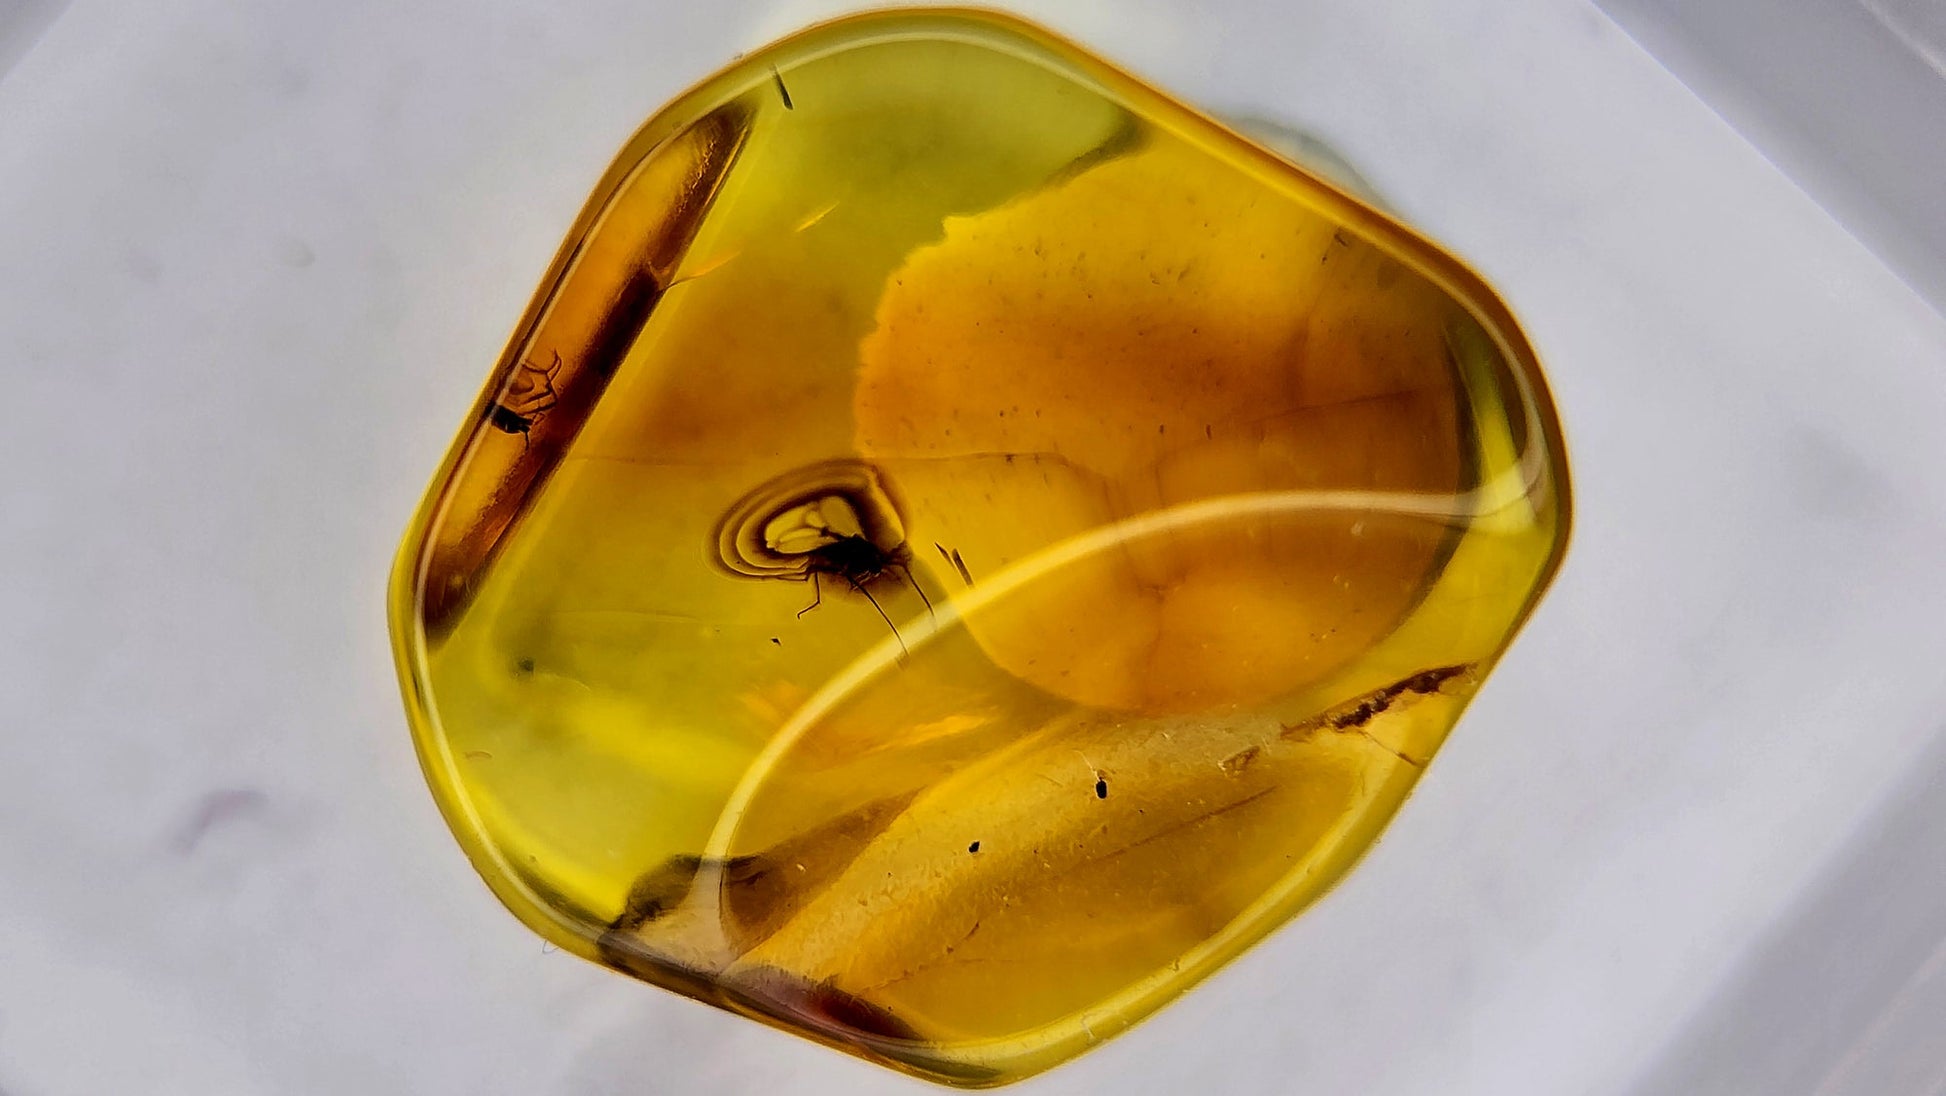 Insect Amber 31